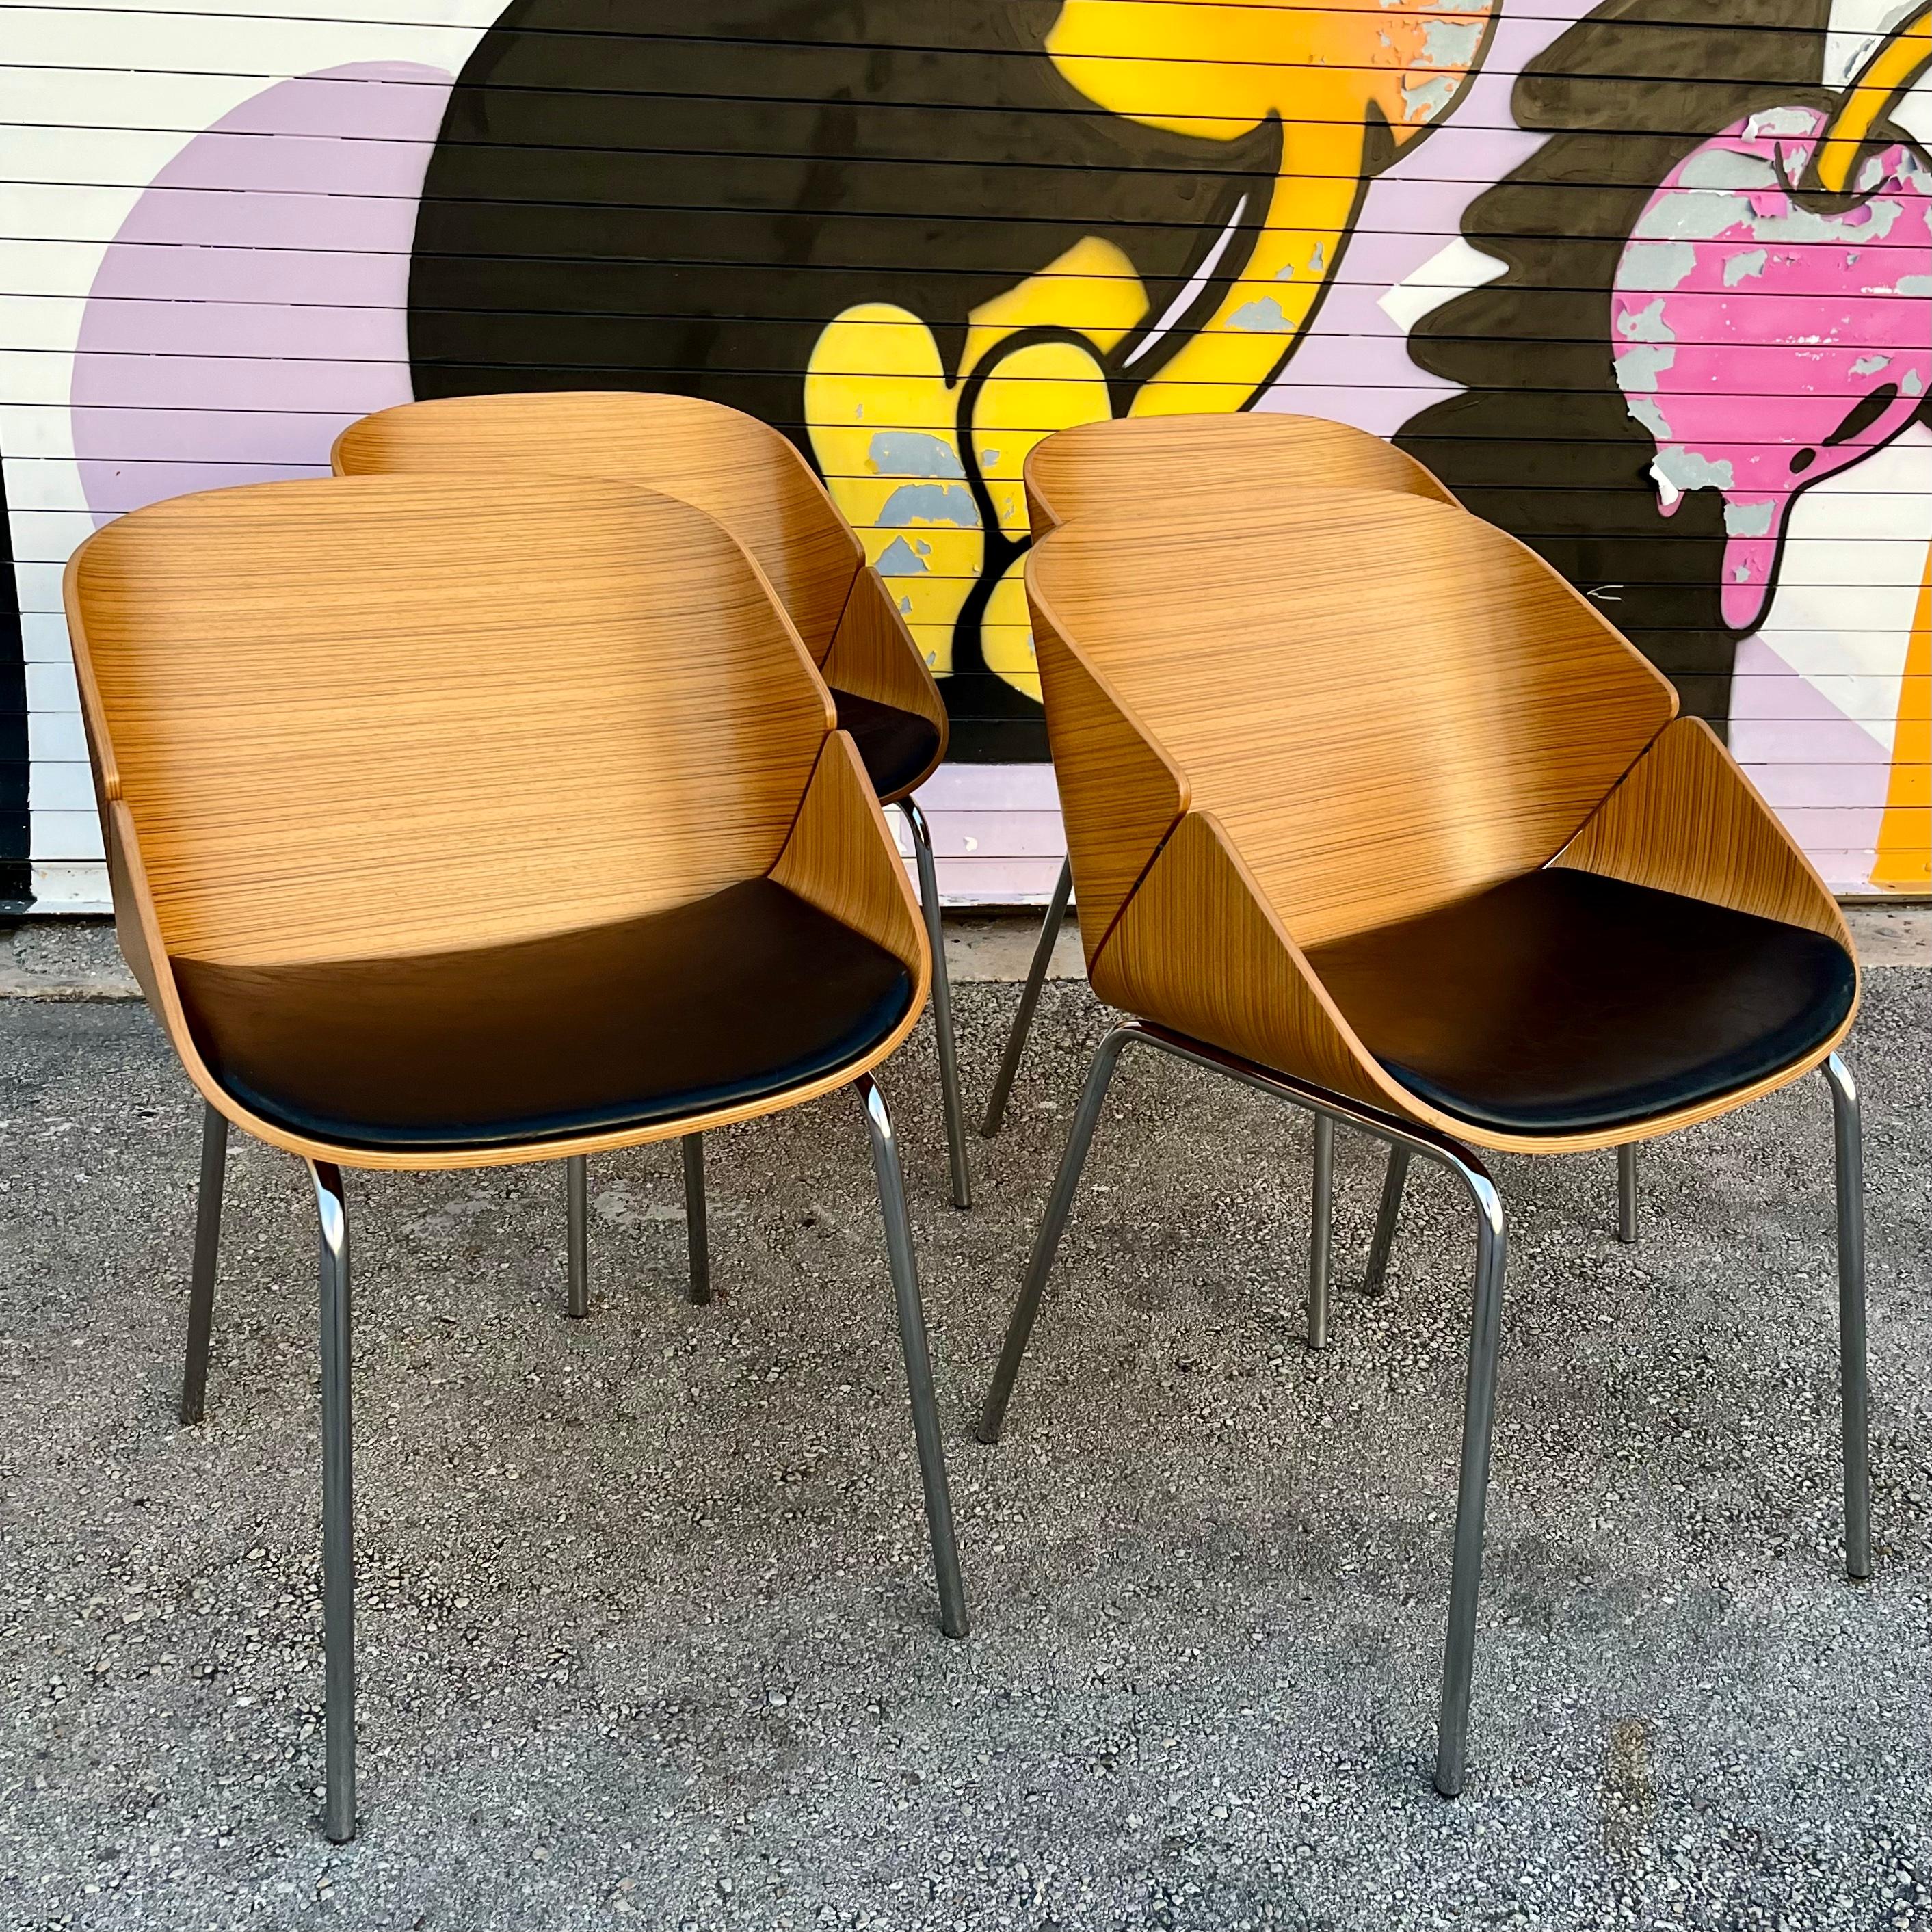 Set of Four Vintage Early 21st Century Babà Lounge/ Dining Chairs designed by Biagio Cisotti and Sandra Laube for Plank Furniture Italy. 
Feature a Mid Century Modern Design with a bent Zebra wood shell, Chrome legs, and the original textured faux